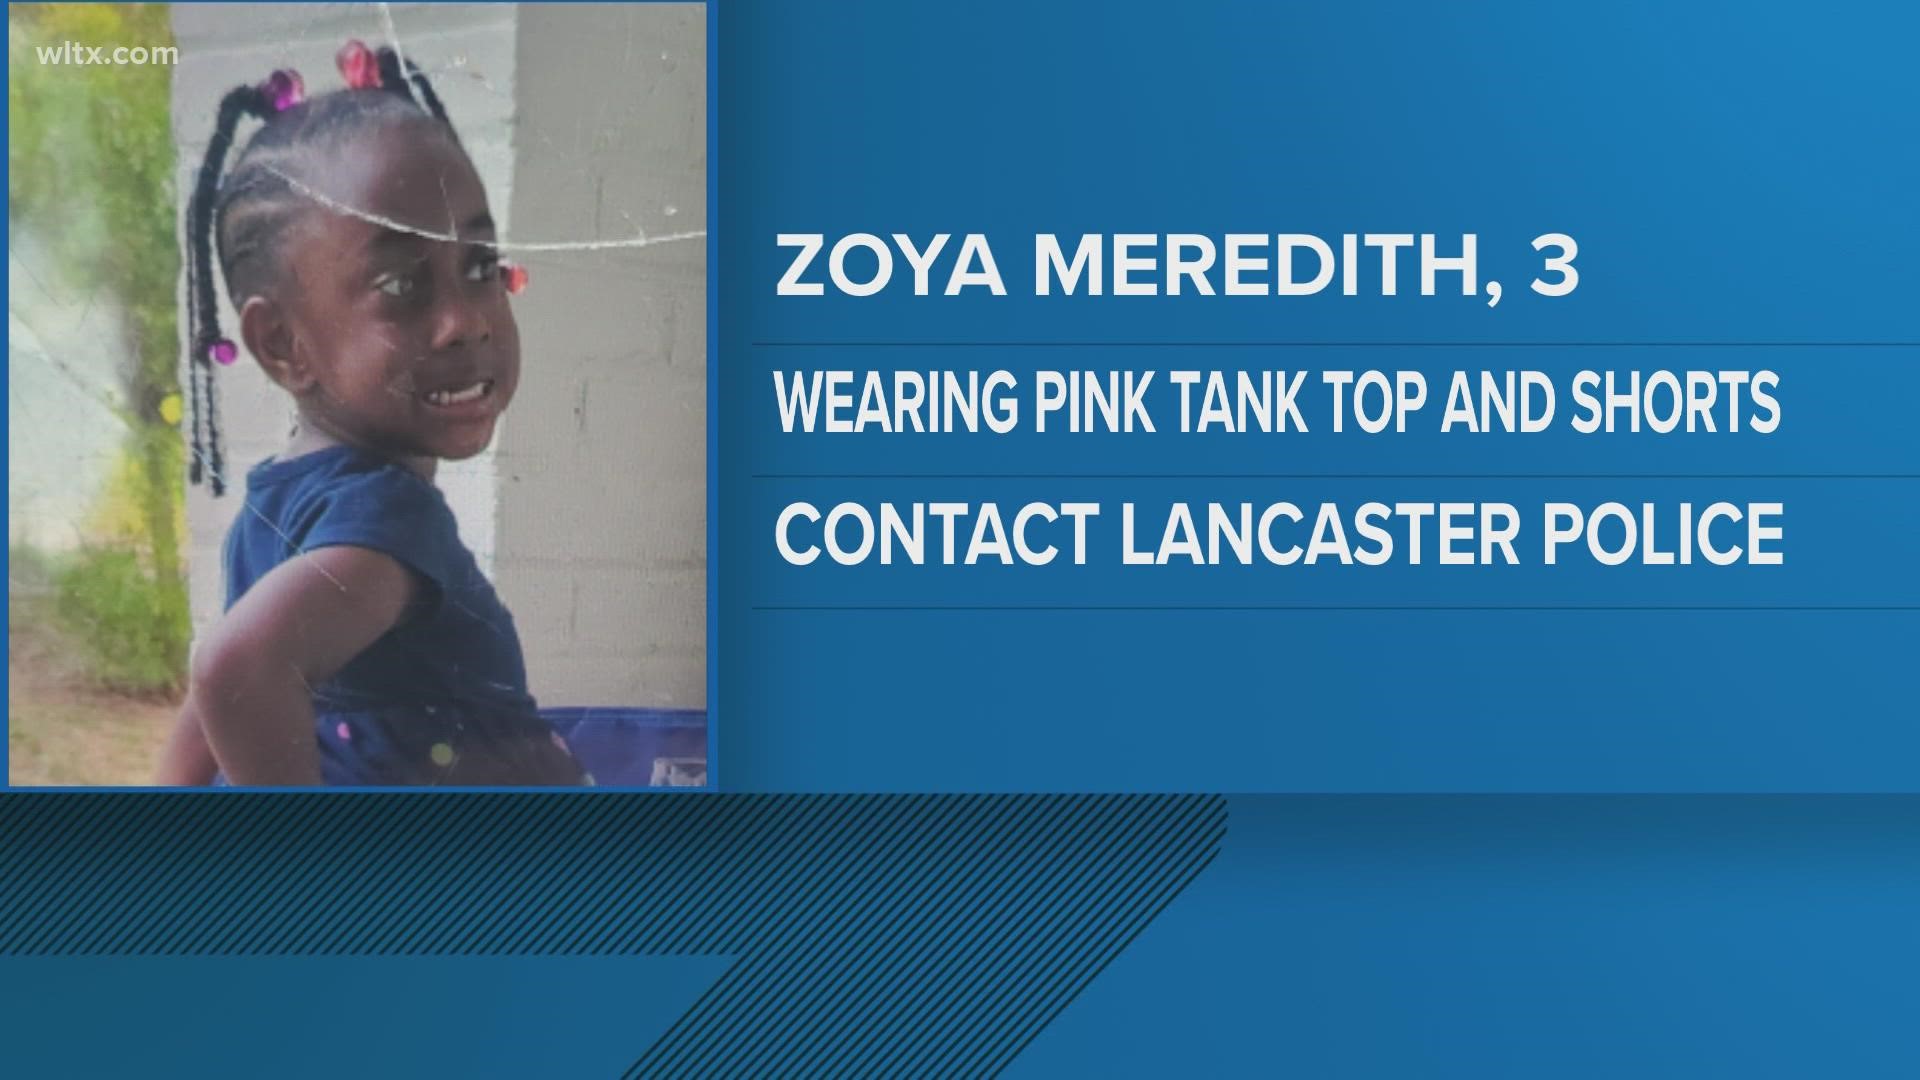 According to police, Zoya Meredith was last seen wearing a pink tank top and pink shorts around 9 a.m. Friday morning in Lancaster County.